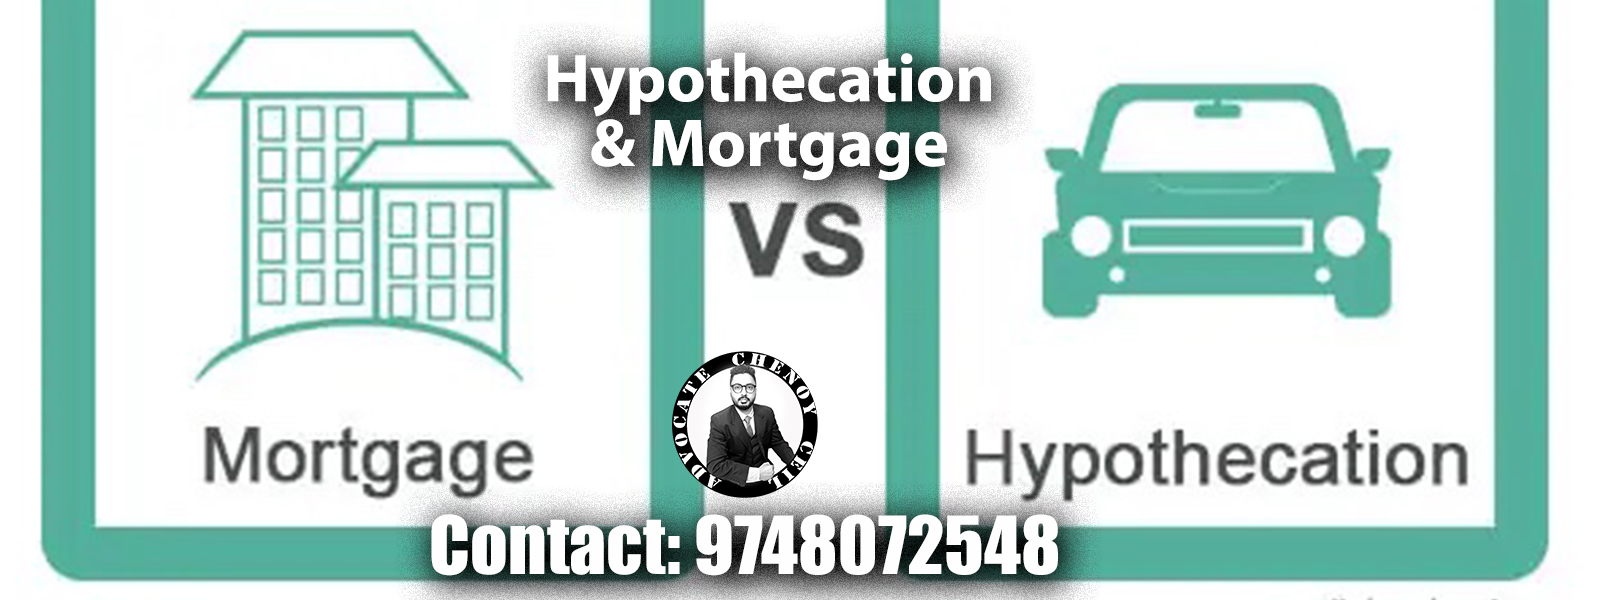 Hypothecation Mortgage Lawyer